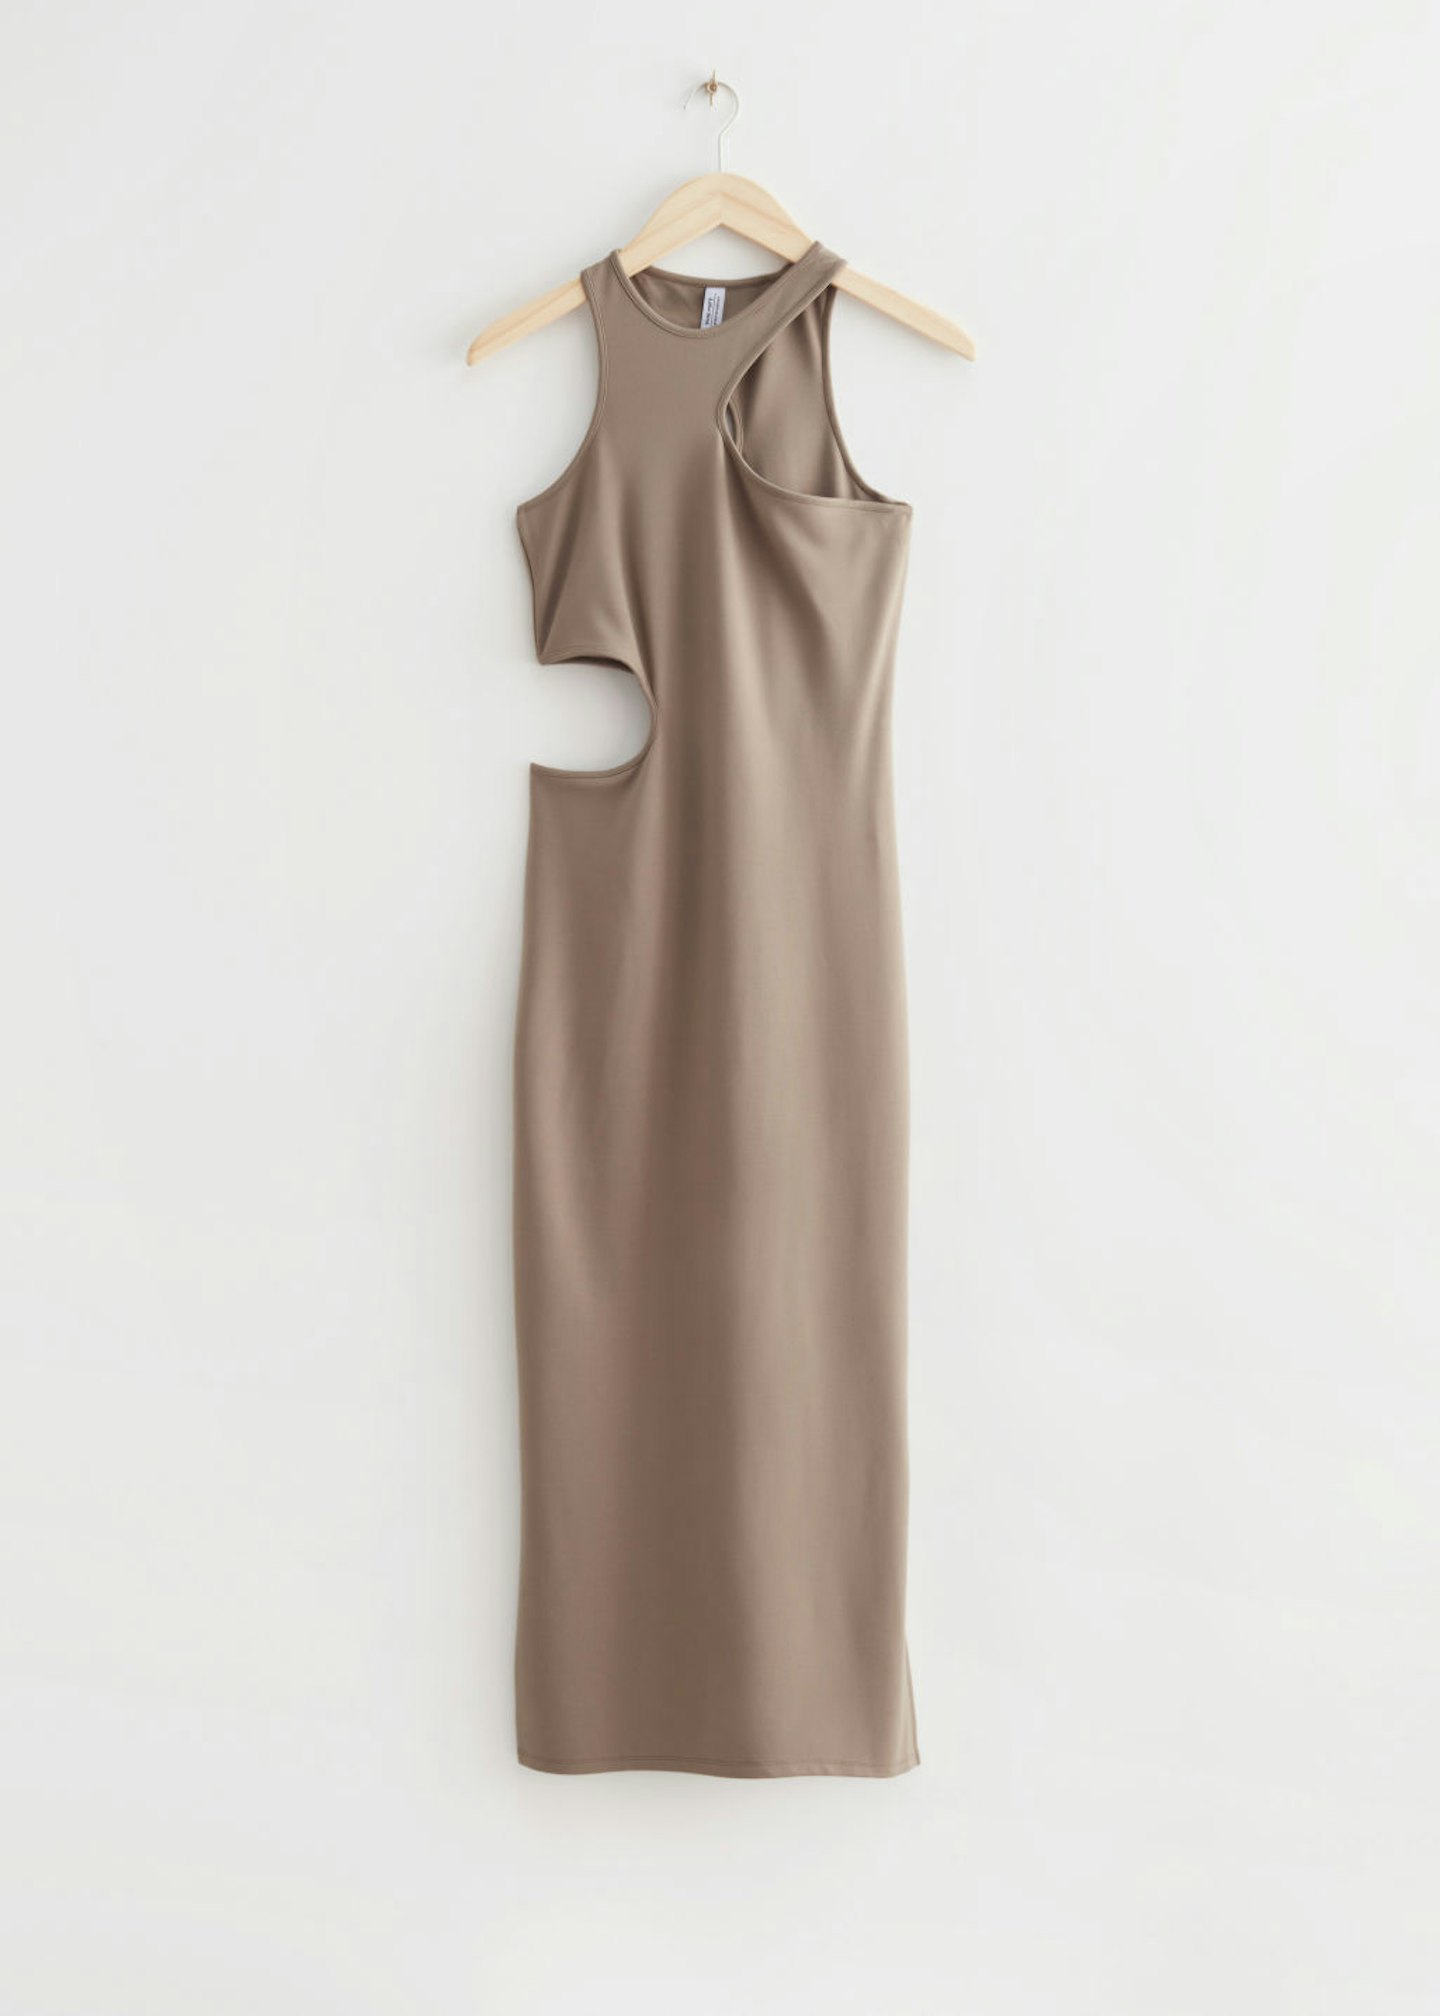  Other Stories Tank Top Midi Dress in Natural